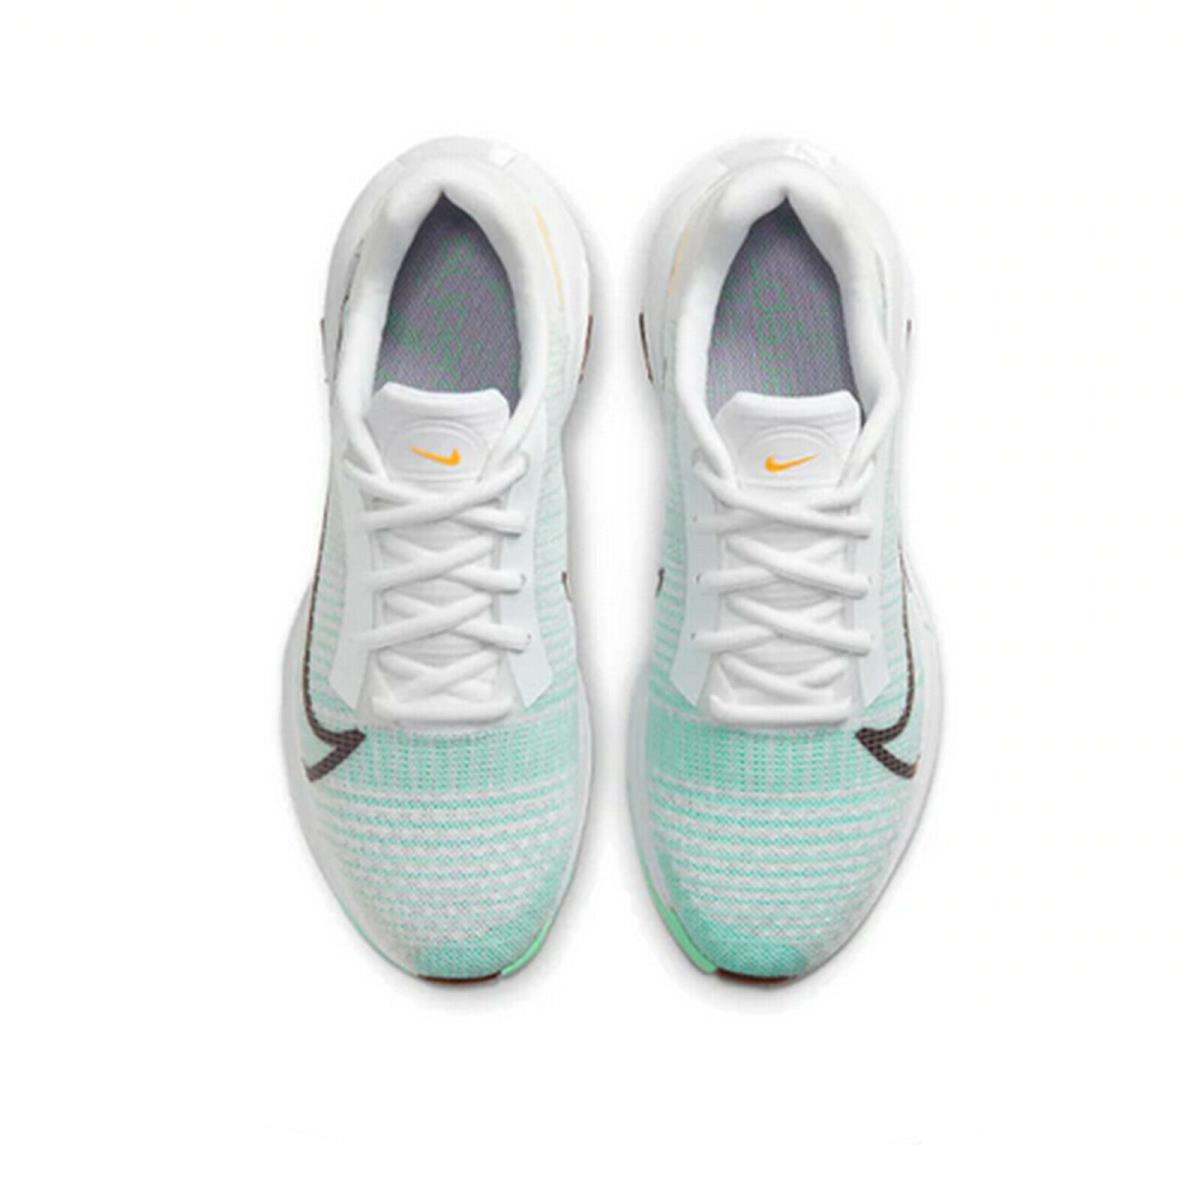 Nike shoes ZOOMX SUPERREP - WHITE/BRONZE ECLIPSE 2